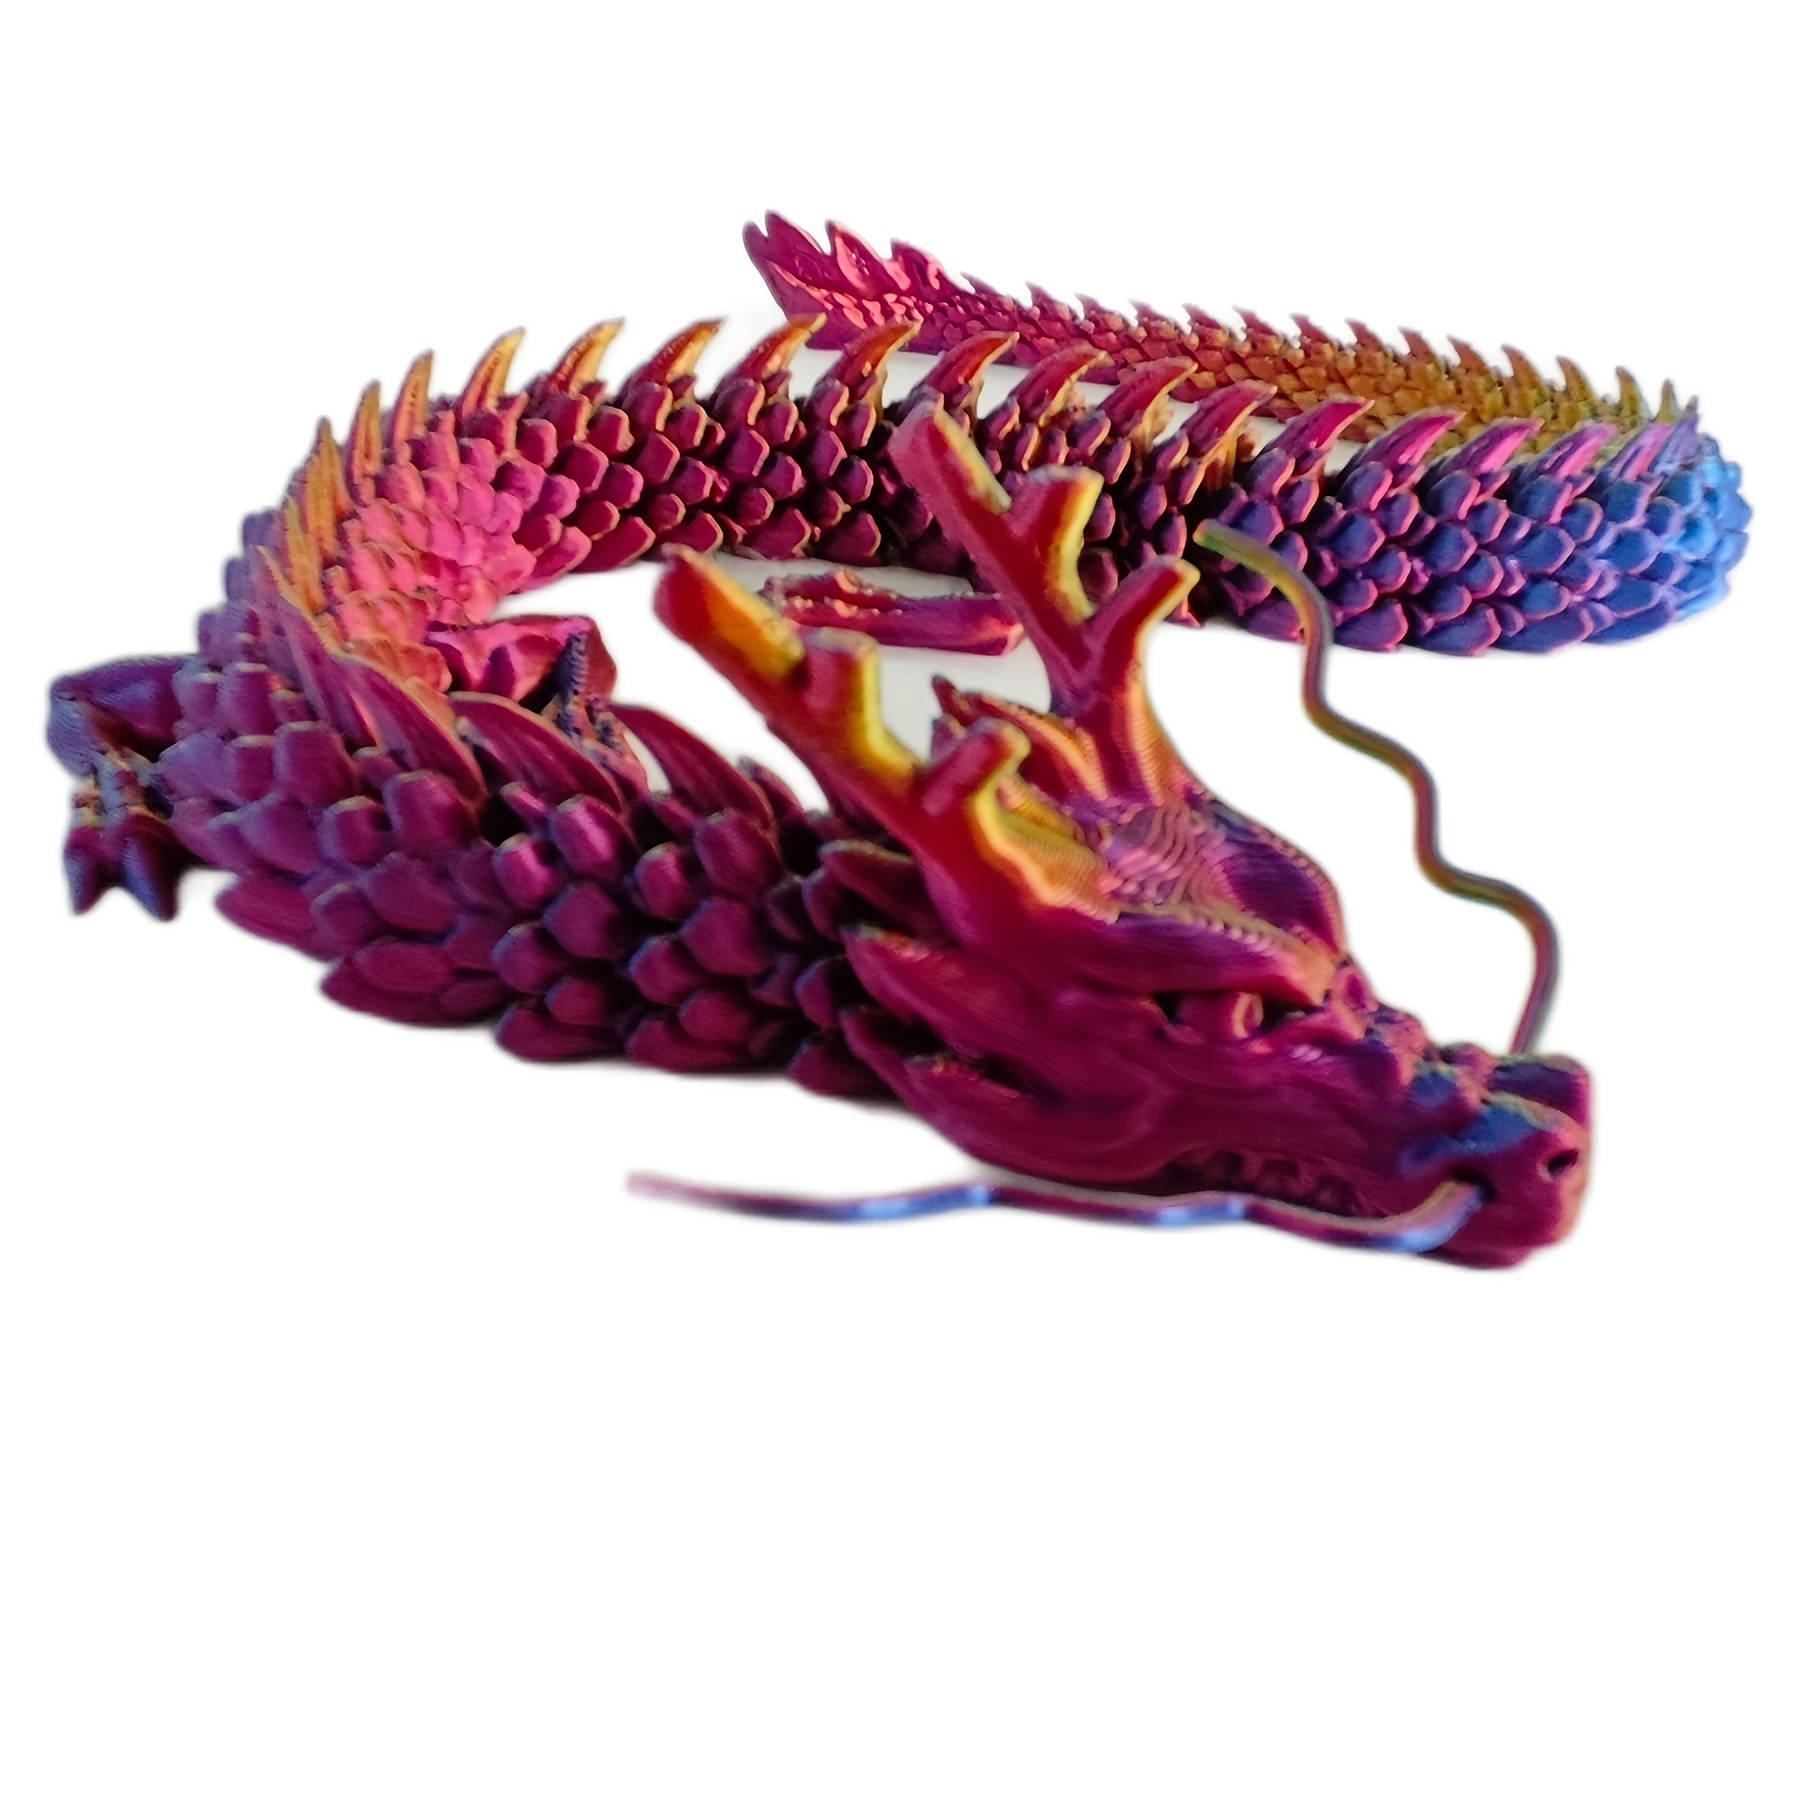 3D Printed Articulated Dragon, Rotatable and Posable Dragon Model